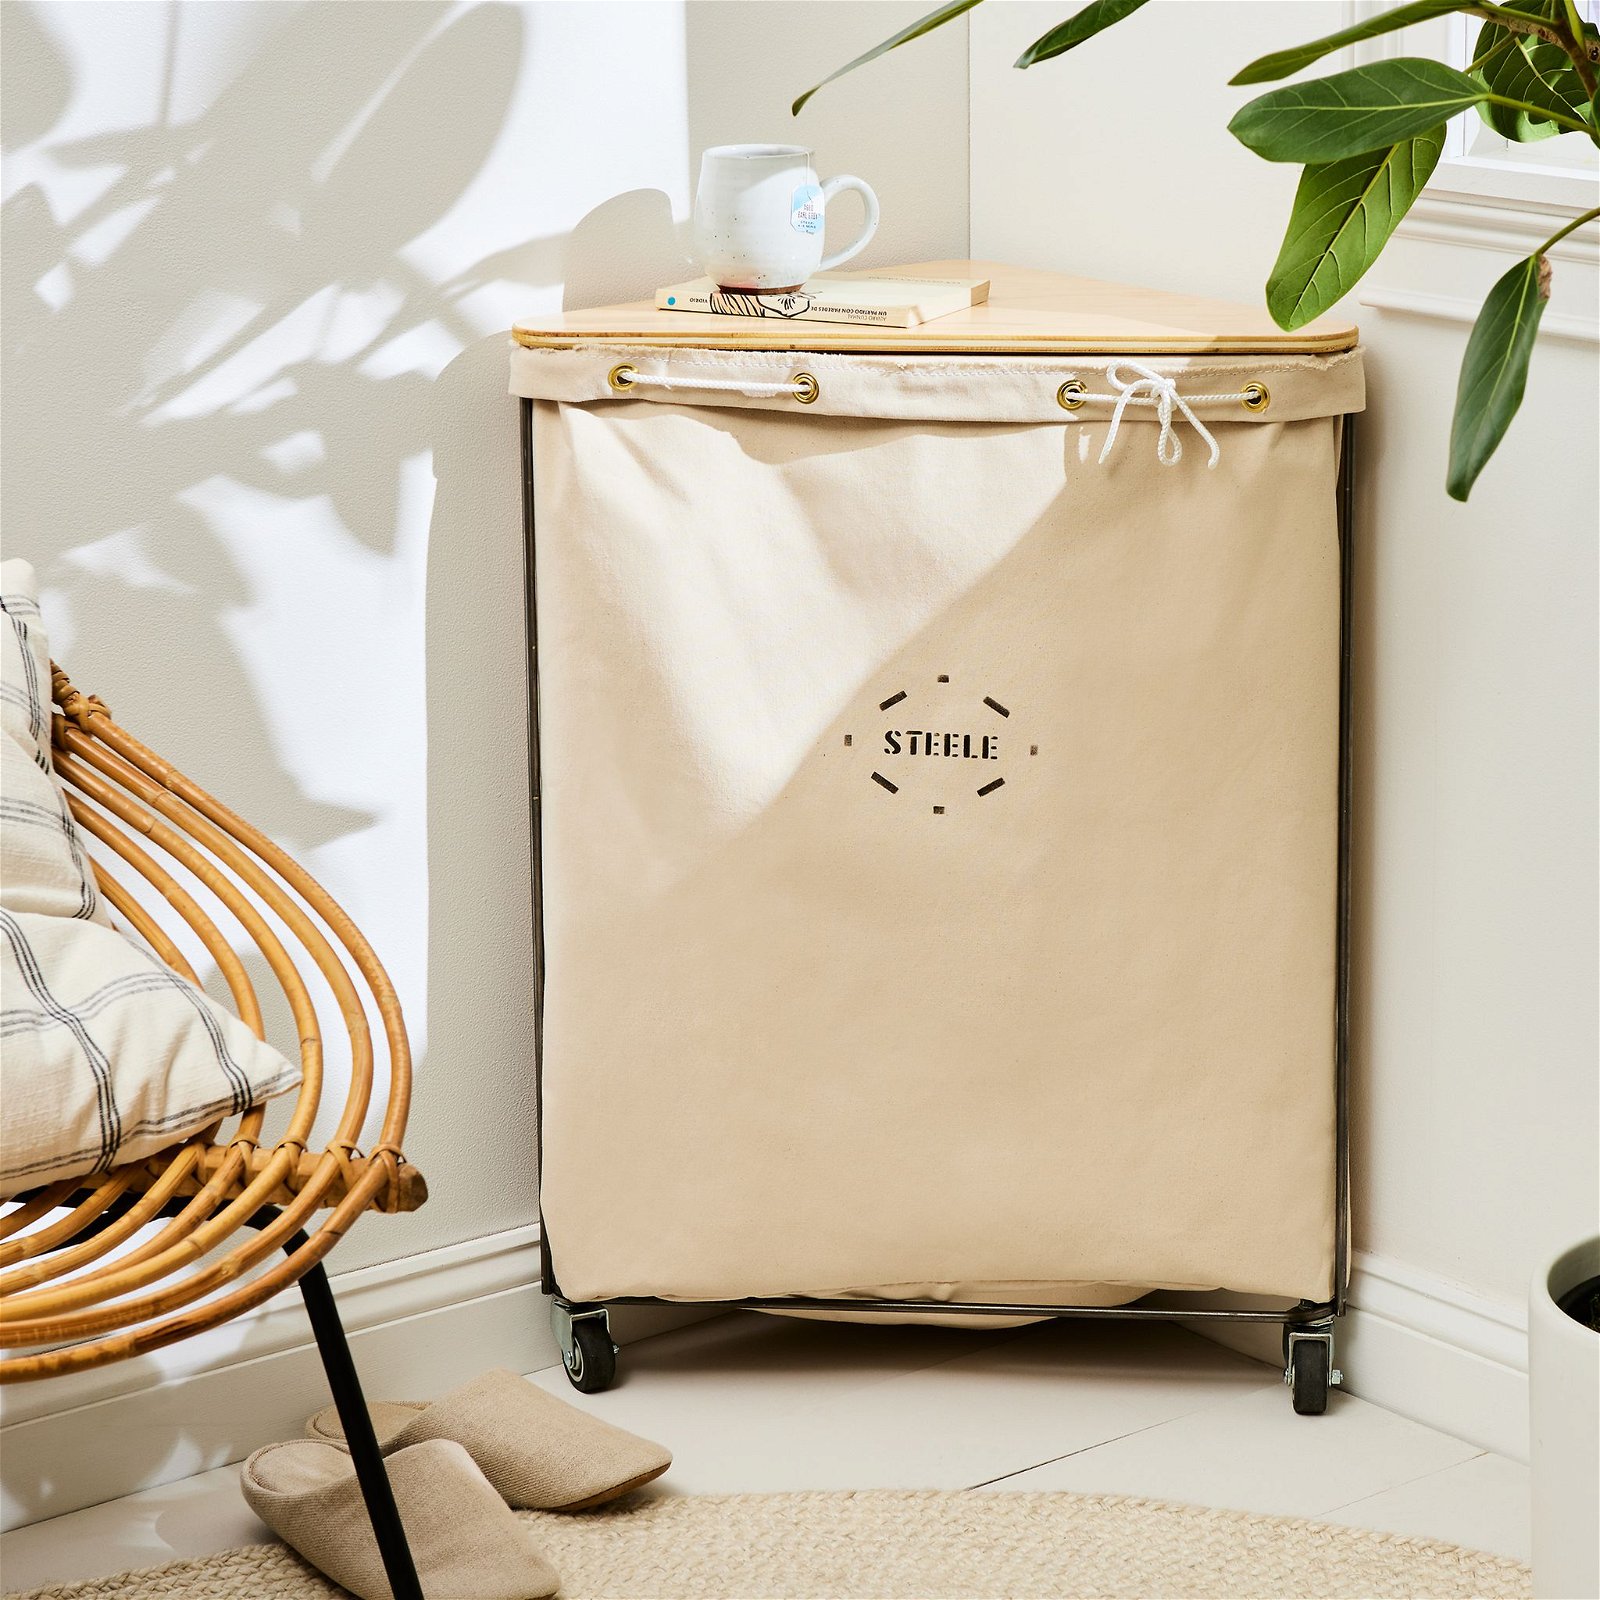 Steele Canvas Elevated Laundry Basket with Lid